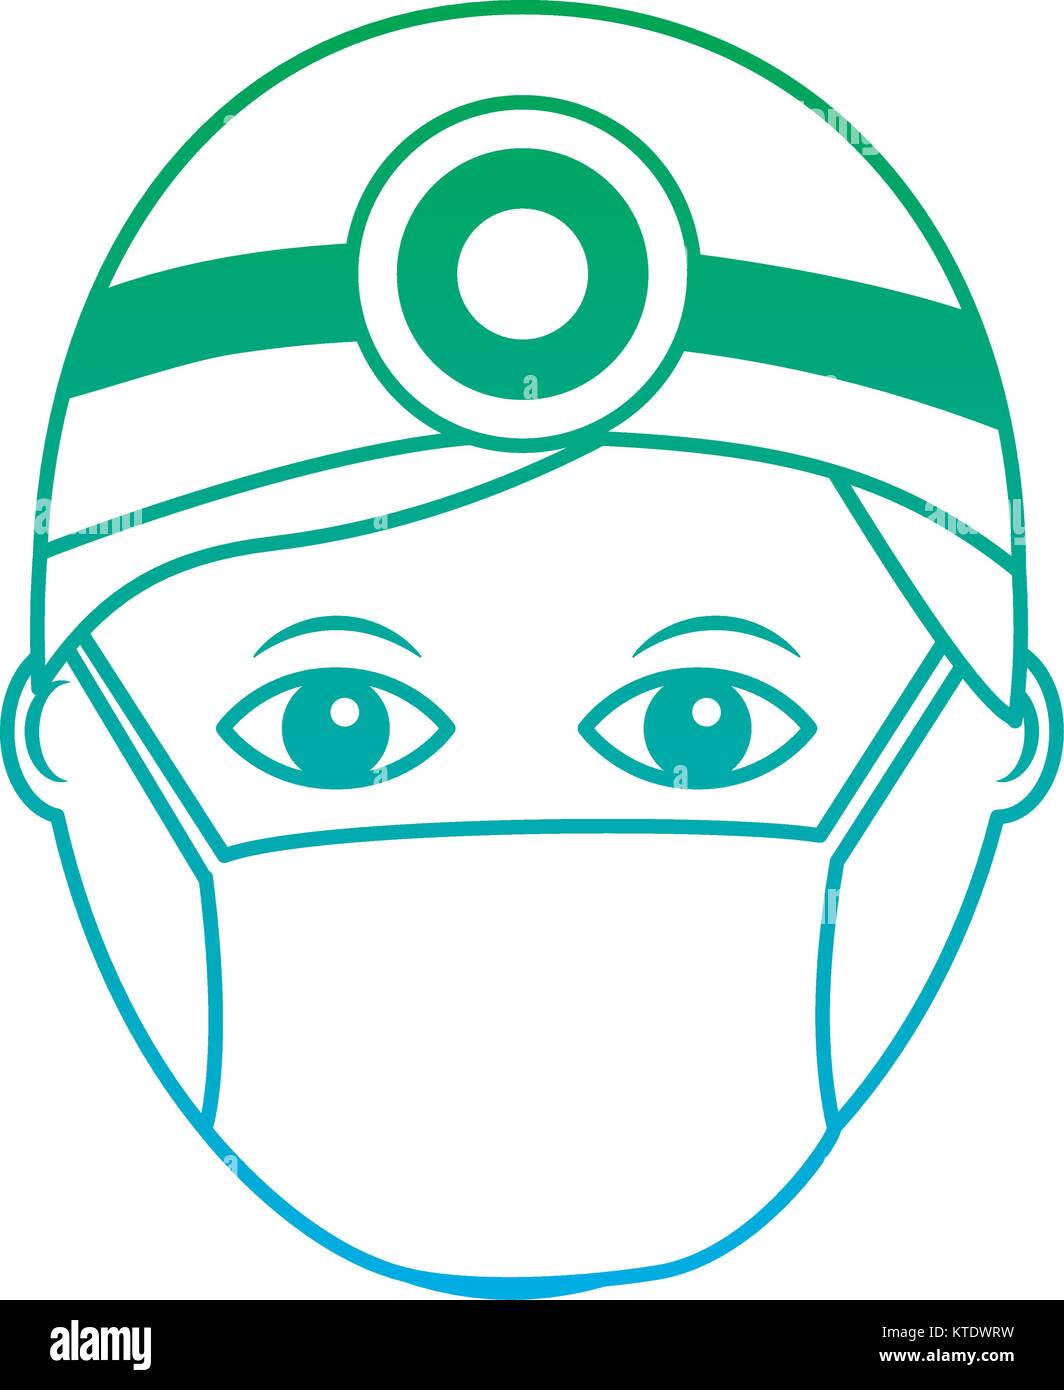 doctor healthcare icon image vector illustration design  green to blue ombre line Stock Vector